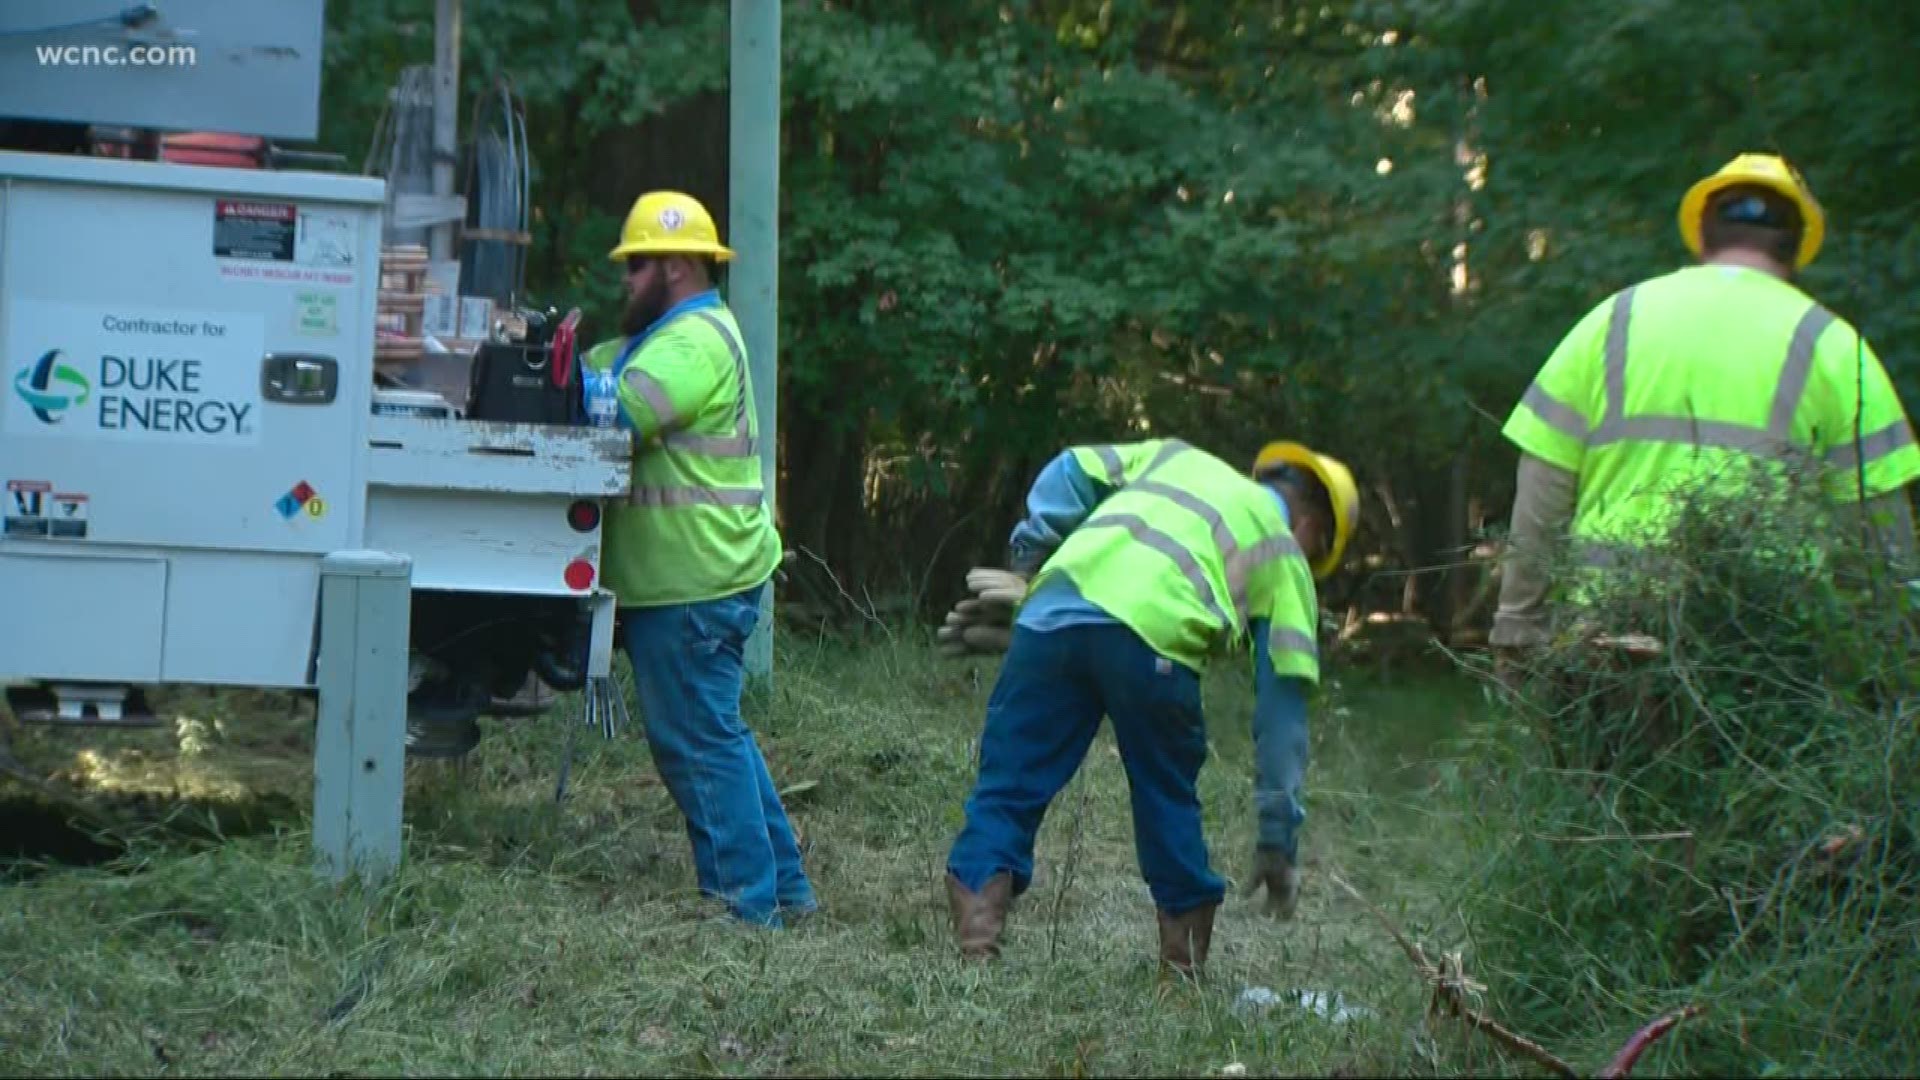 Duke Energy is hoping to get power back by Monday so CMS can resume school as soon as possible.